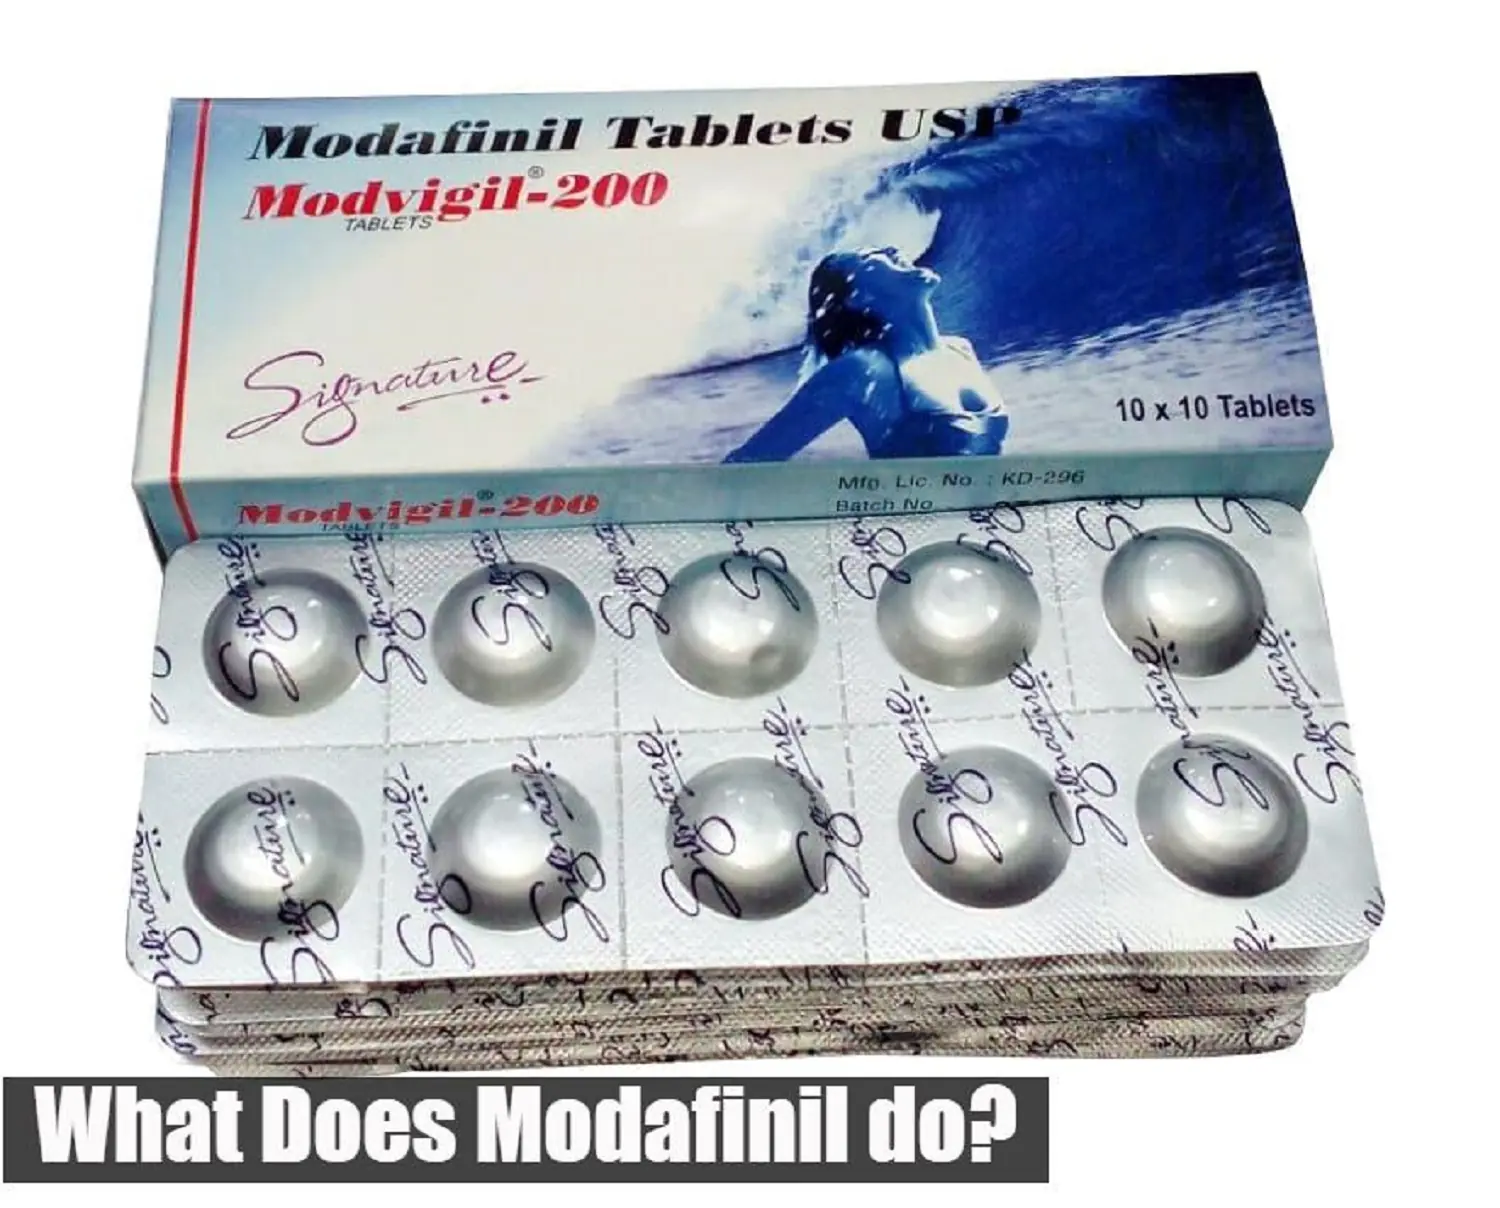 What does Modafinil do